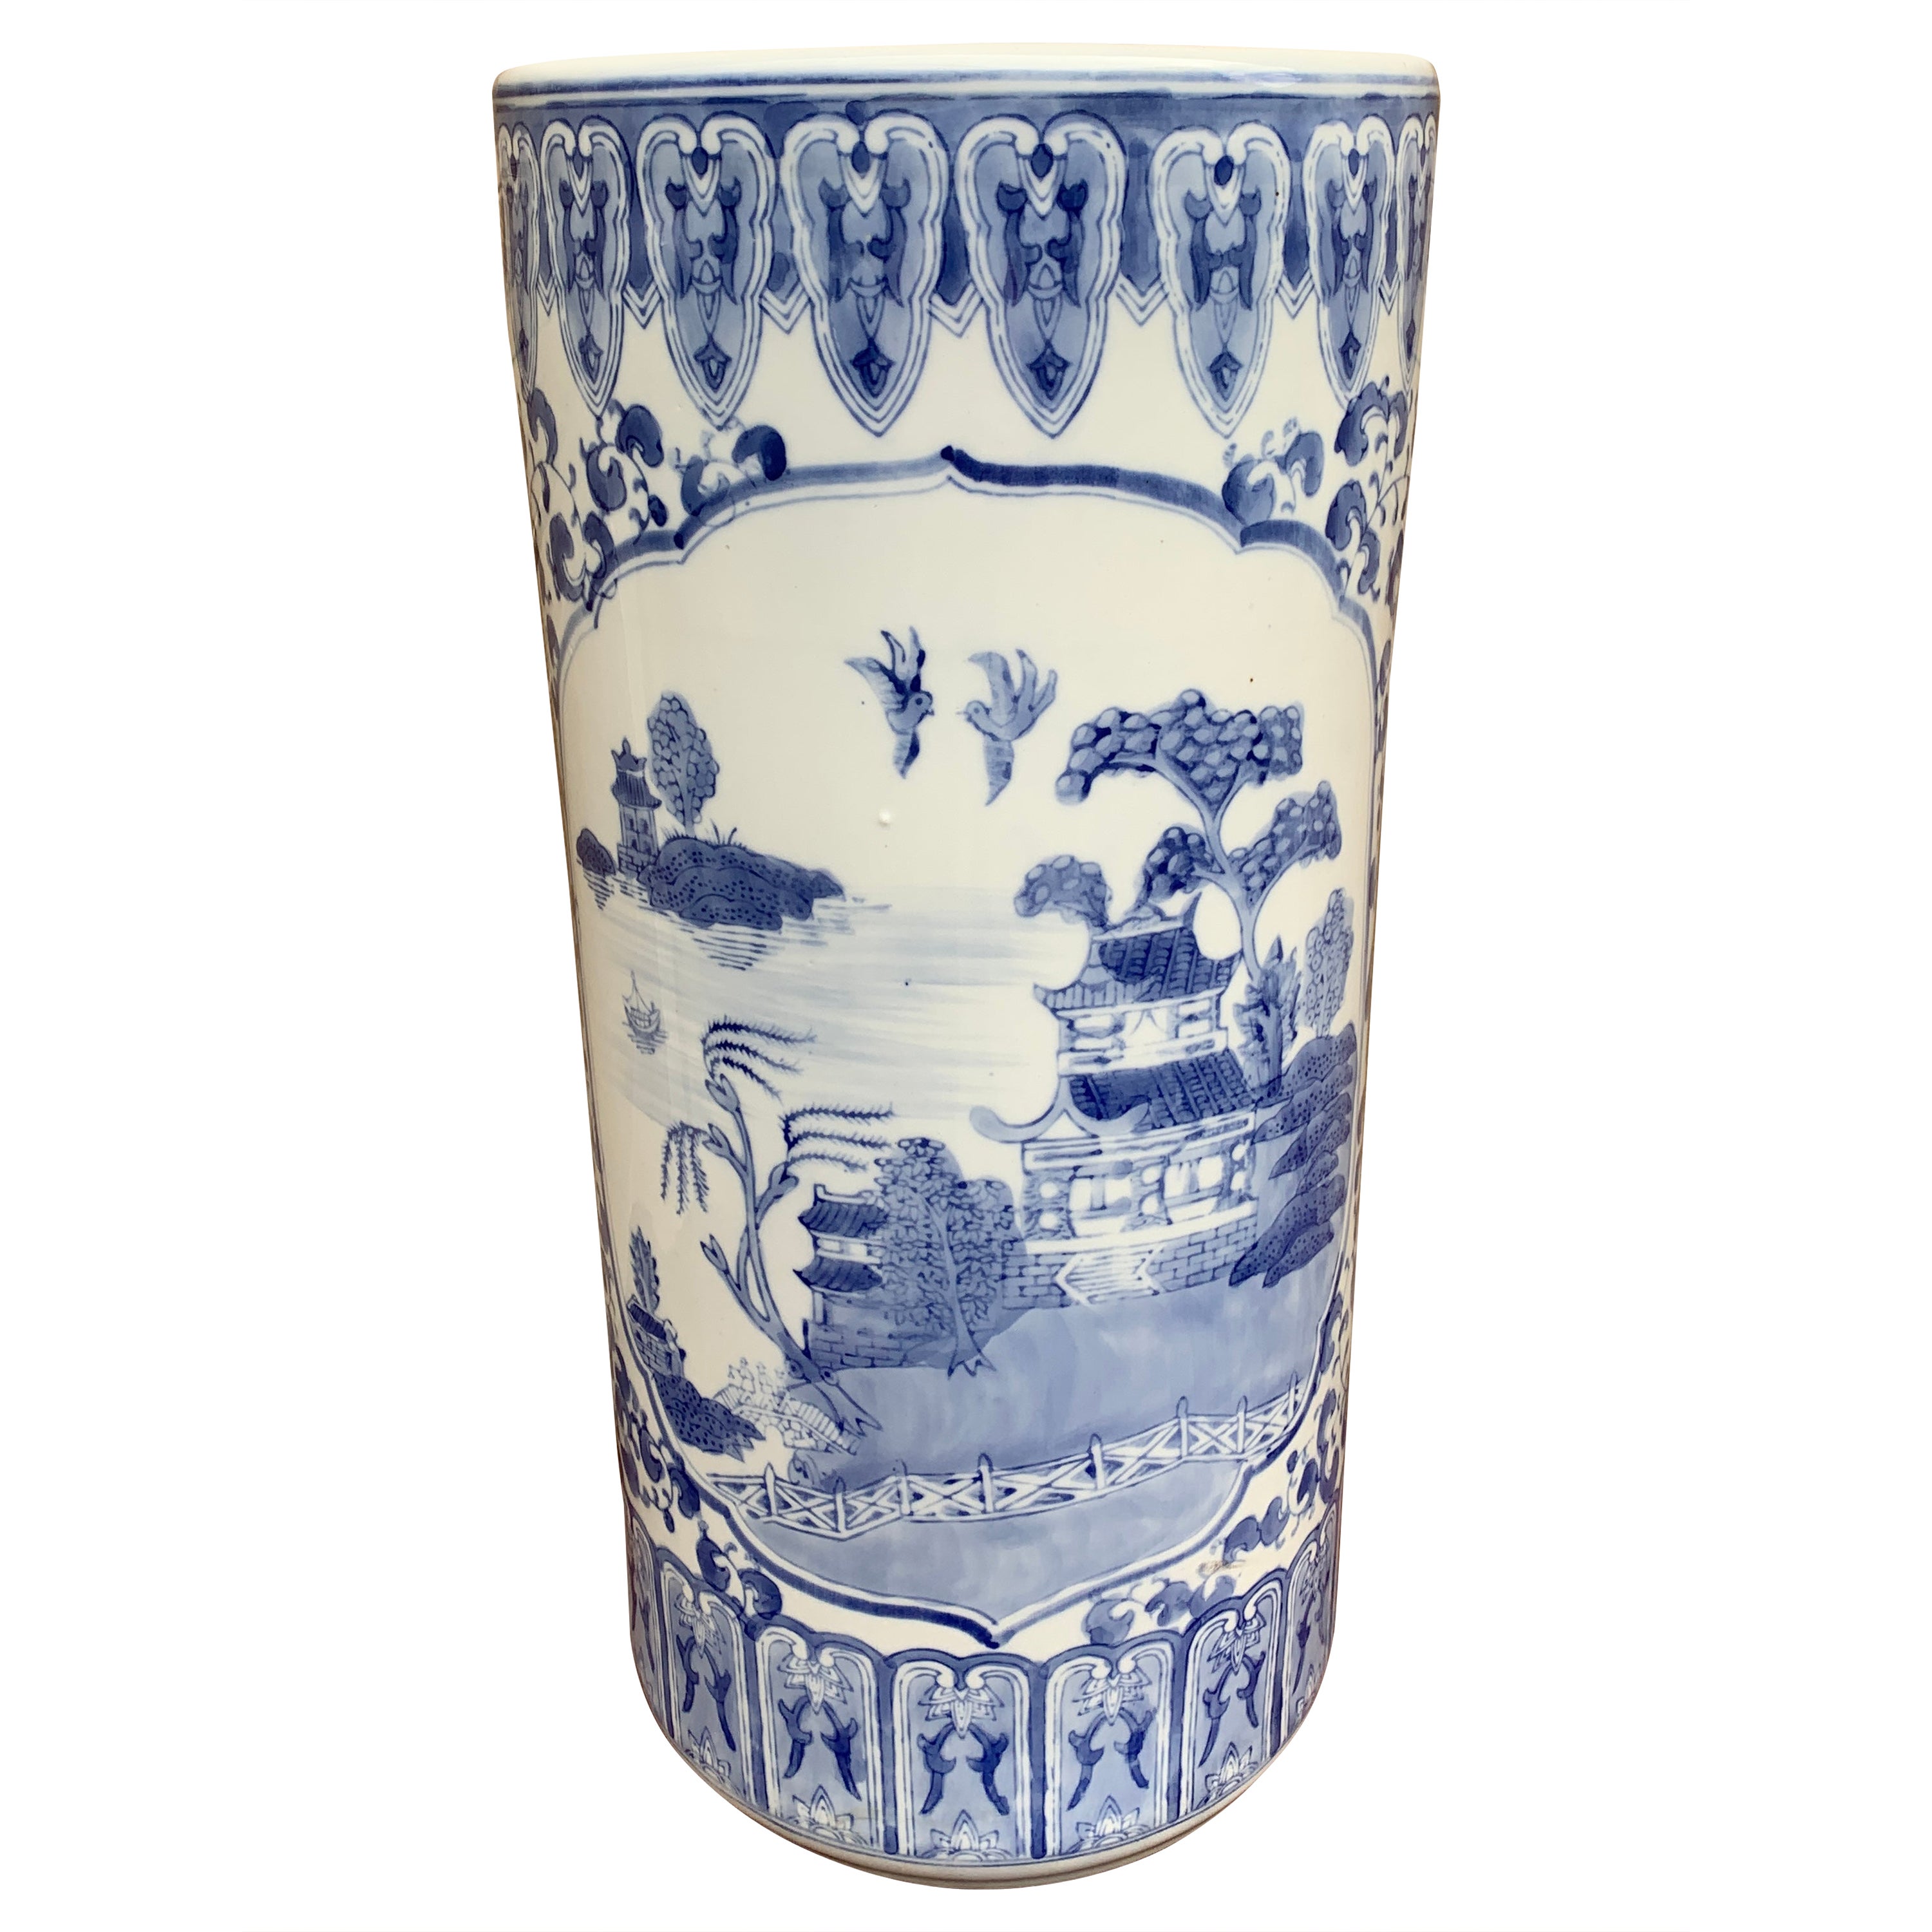 Vintage Chinoiserie Blue and White Porcelain Umbrella Stand